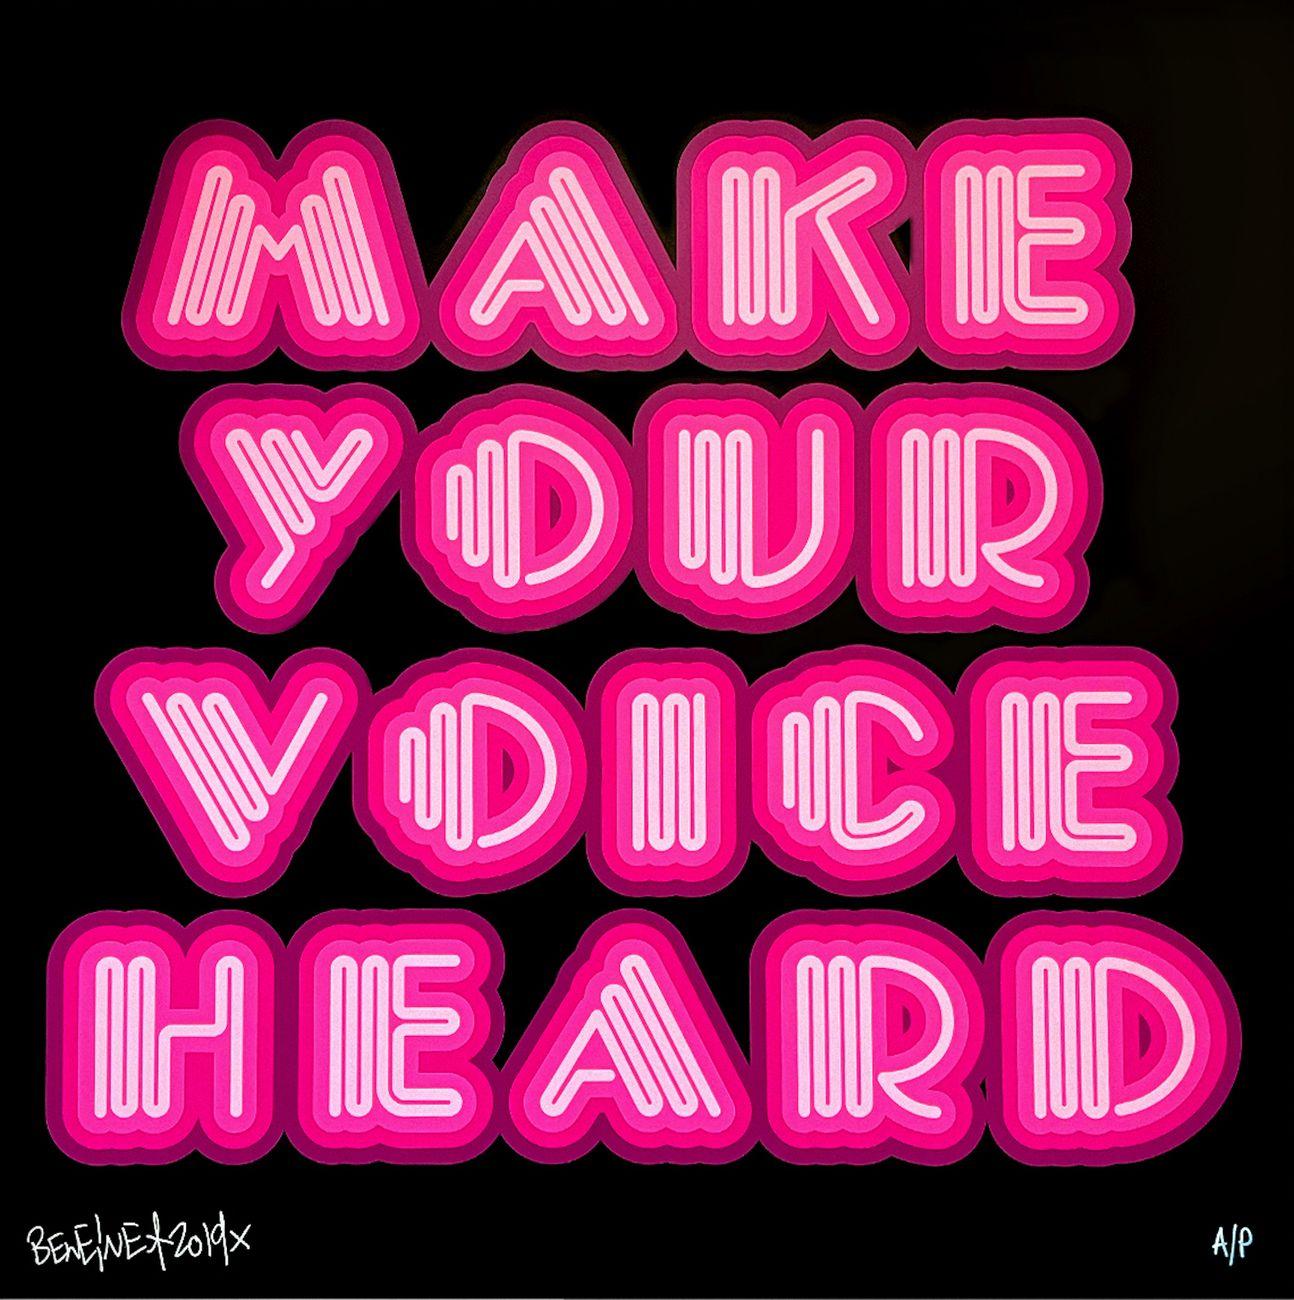 Make Your Voice Heard (Pink)